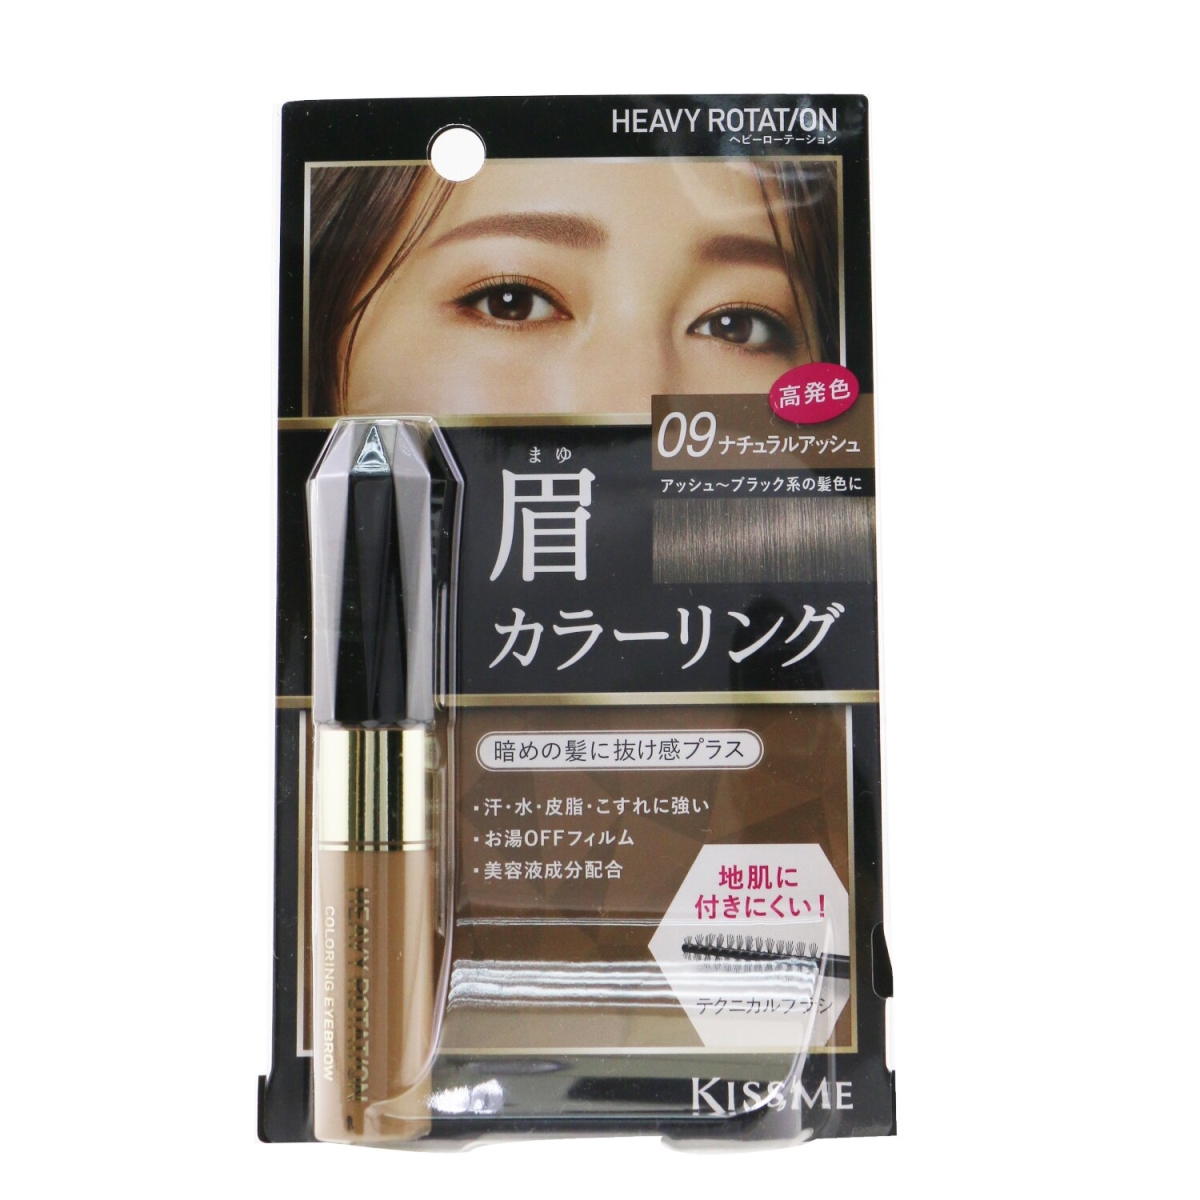 Picture of Kiss Me 264167 0.28 oz Heavy Rotation Coloring Eyebrow, No.09 Natural Ash